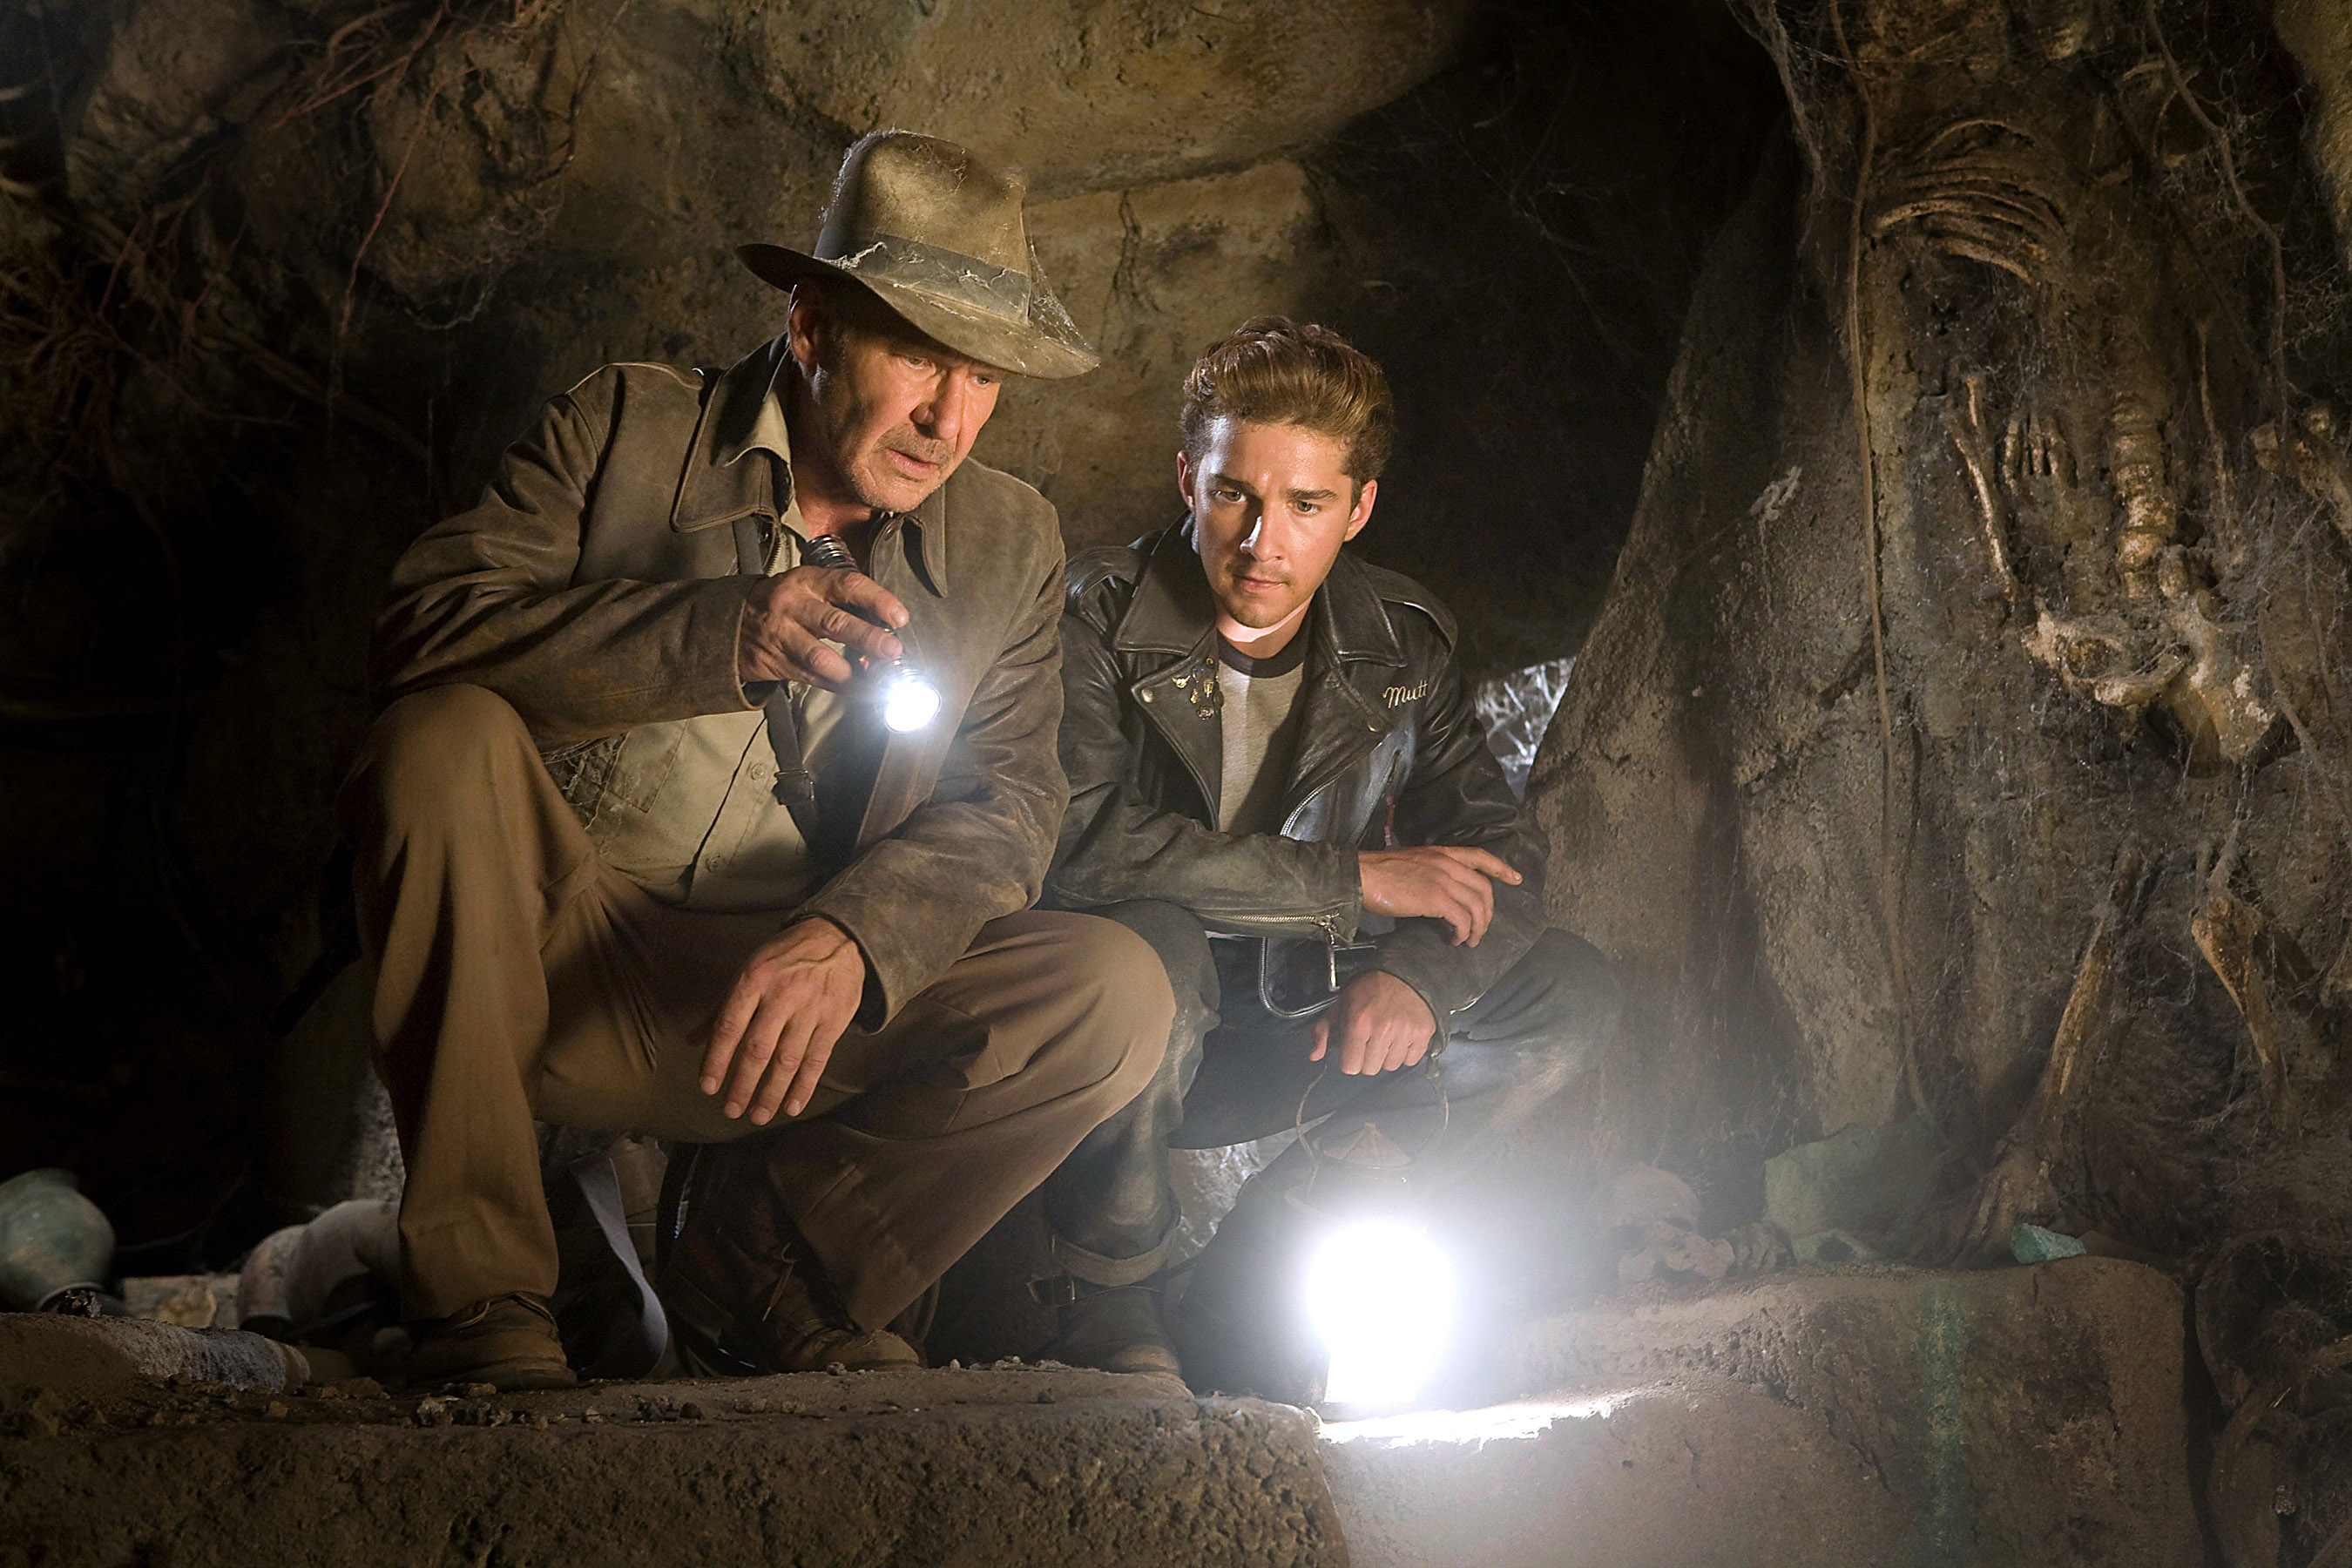 Screenshot from &quot;Indiana Jones and the Kingdom of the Crystal Skull&quot;